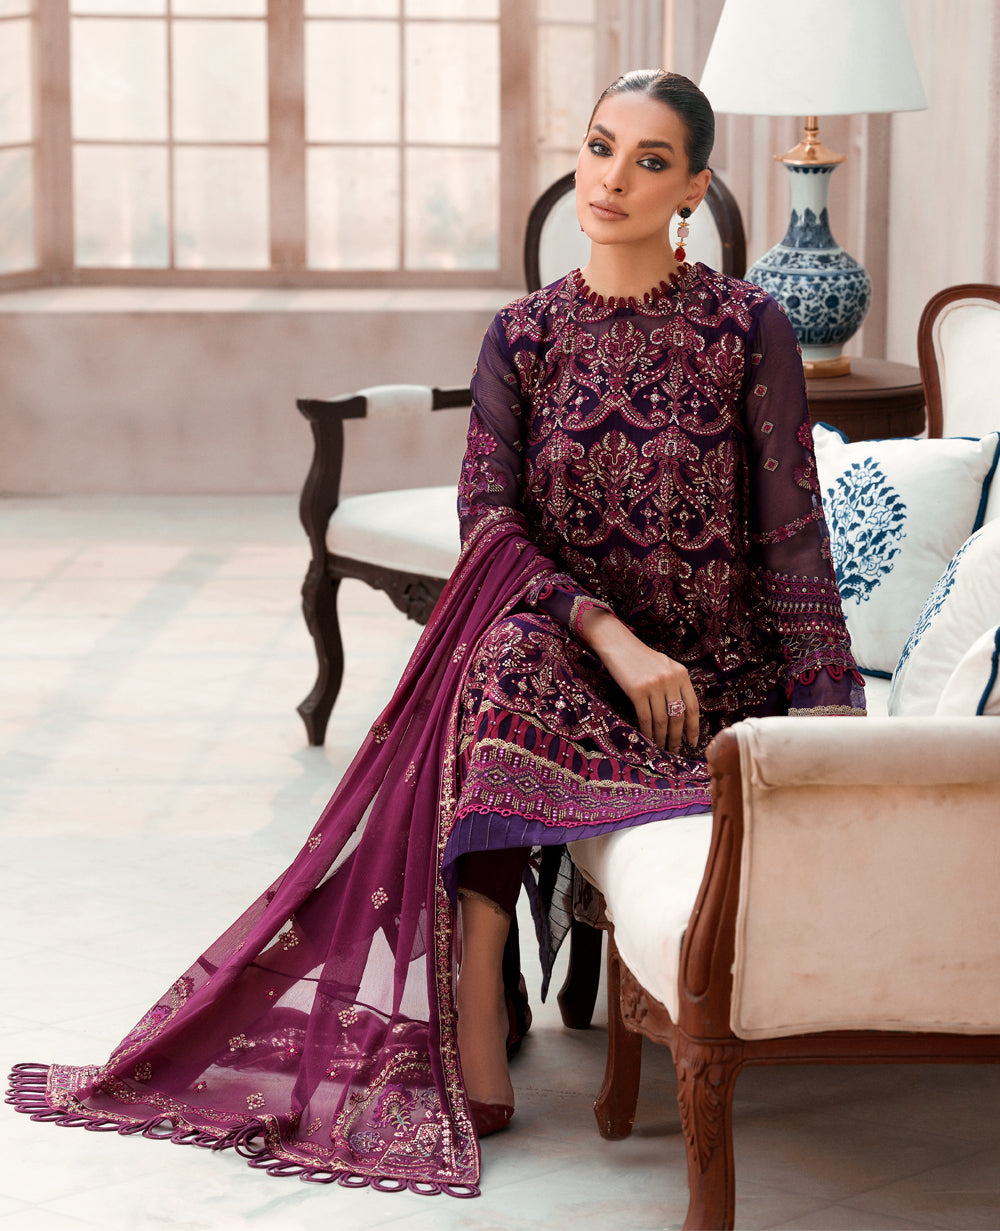 XENIA Formals Mehfilen Luxury Unstitched Chiffon 3Pc Suit - TURAN